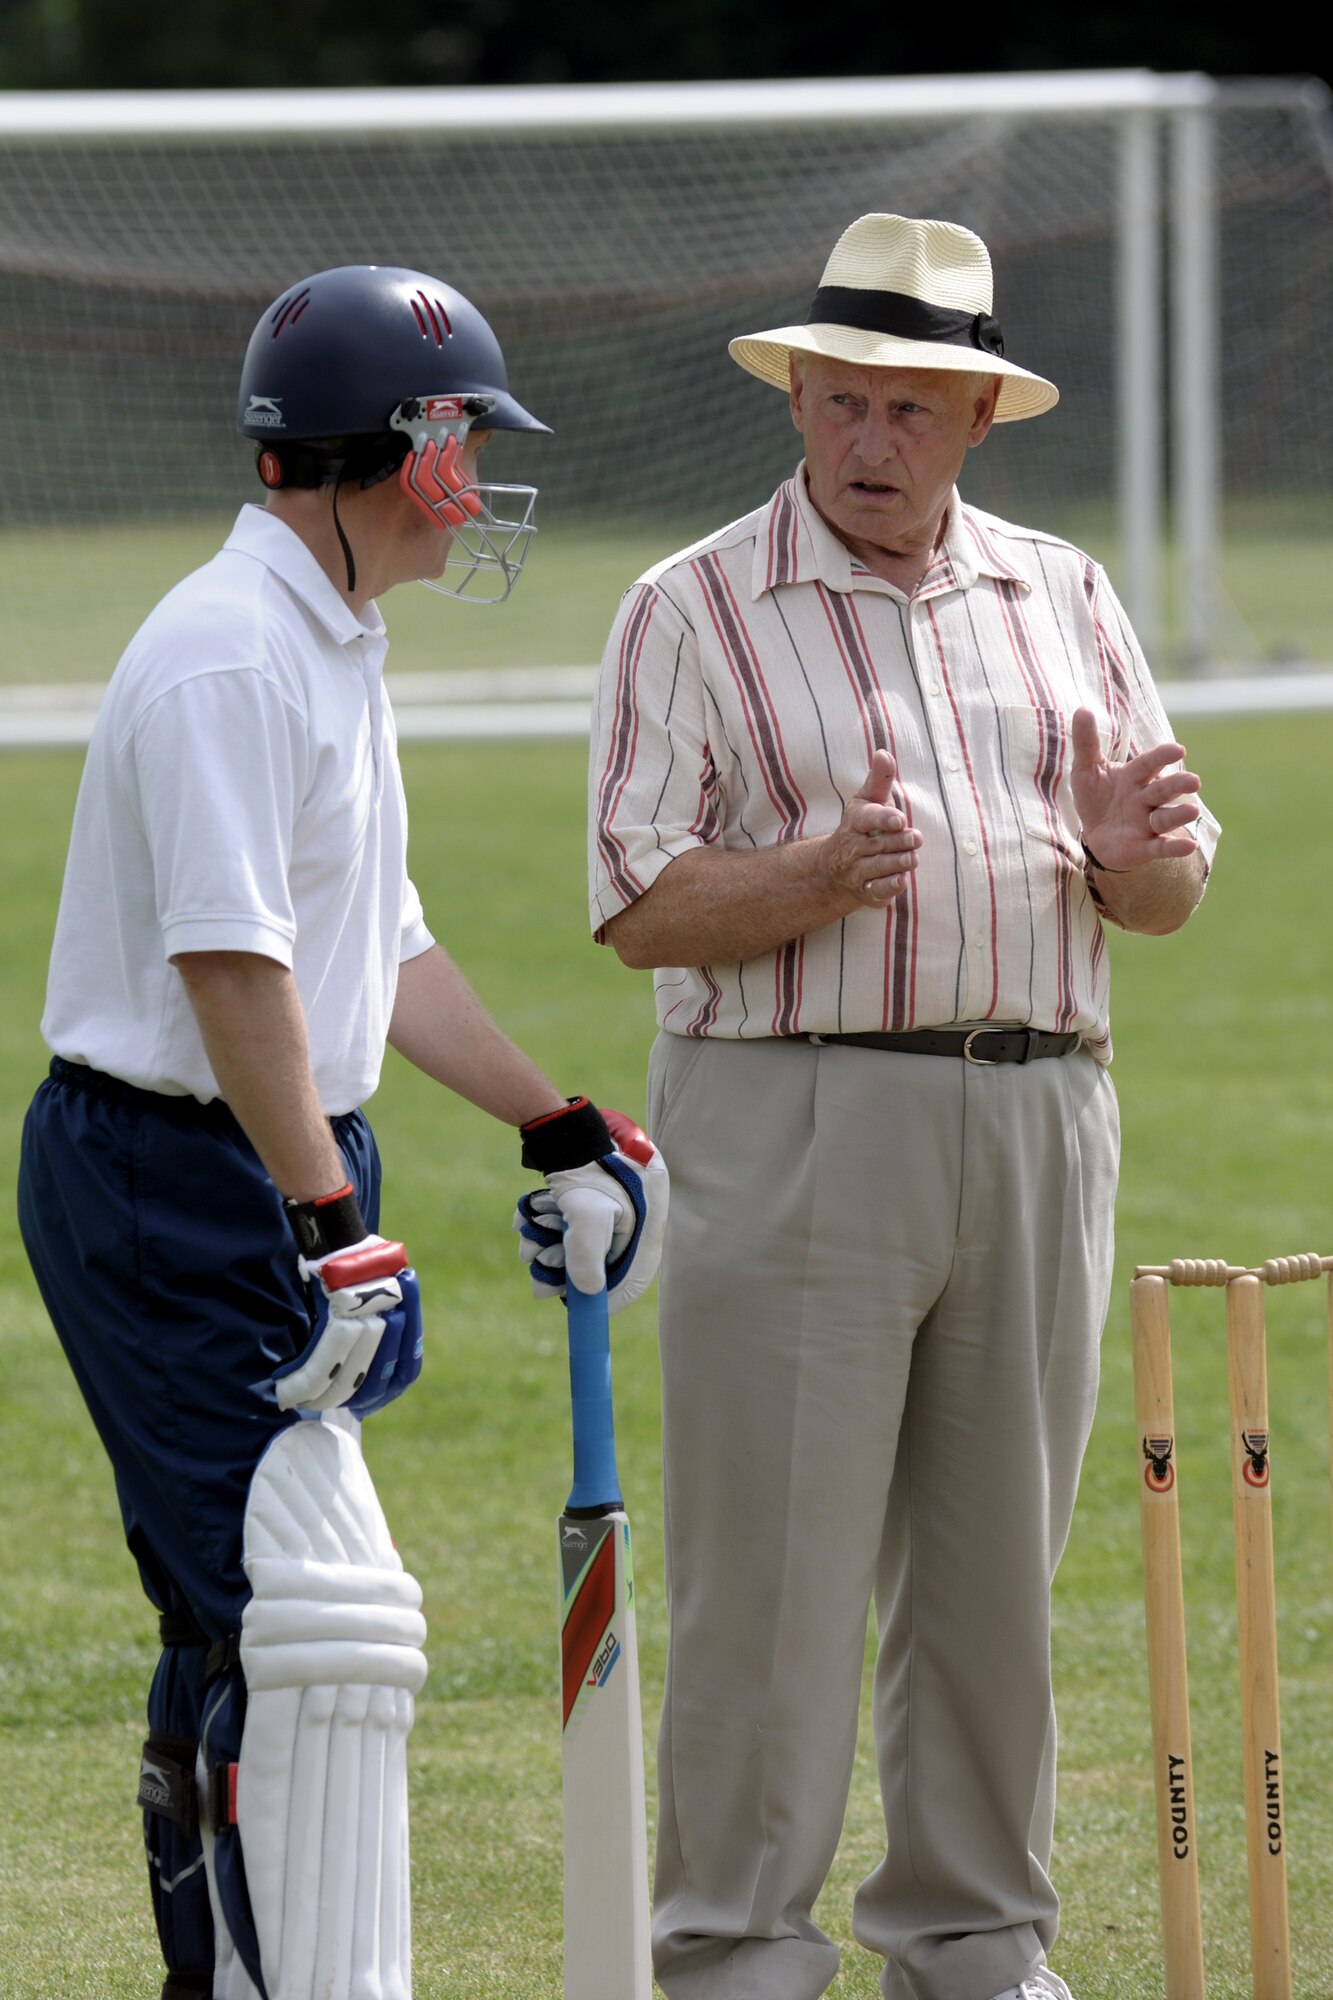 LONGSTANTON, United Kingdom – Lt. Col. Jonathan Bradley, 423rd Air Base Group, gets some tips from Derek Stebbing, 423rd Communications Squadron honorary commander, before batting during the first game played by the team Aug. 19 at Longstanton Bowls Club in Longstanton, United Kingdom. The primary concern of the batsman on strike (i.e., the "striker") is to prevent the ball hitting the wicket and secondarily to score runs by hitting the ball with his bat so that he and his partner have time to run from one end of the pitch to the other before the fielding side can return the ball. To register a run, both runners must touch the ground behind the crease with either their bats or their bodies (the batsmen carry their bats as they run). Each completed run increments the score. (U.S. Air Force photo by Master Sgt. John Barton)